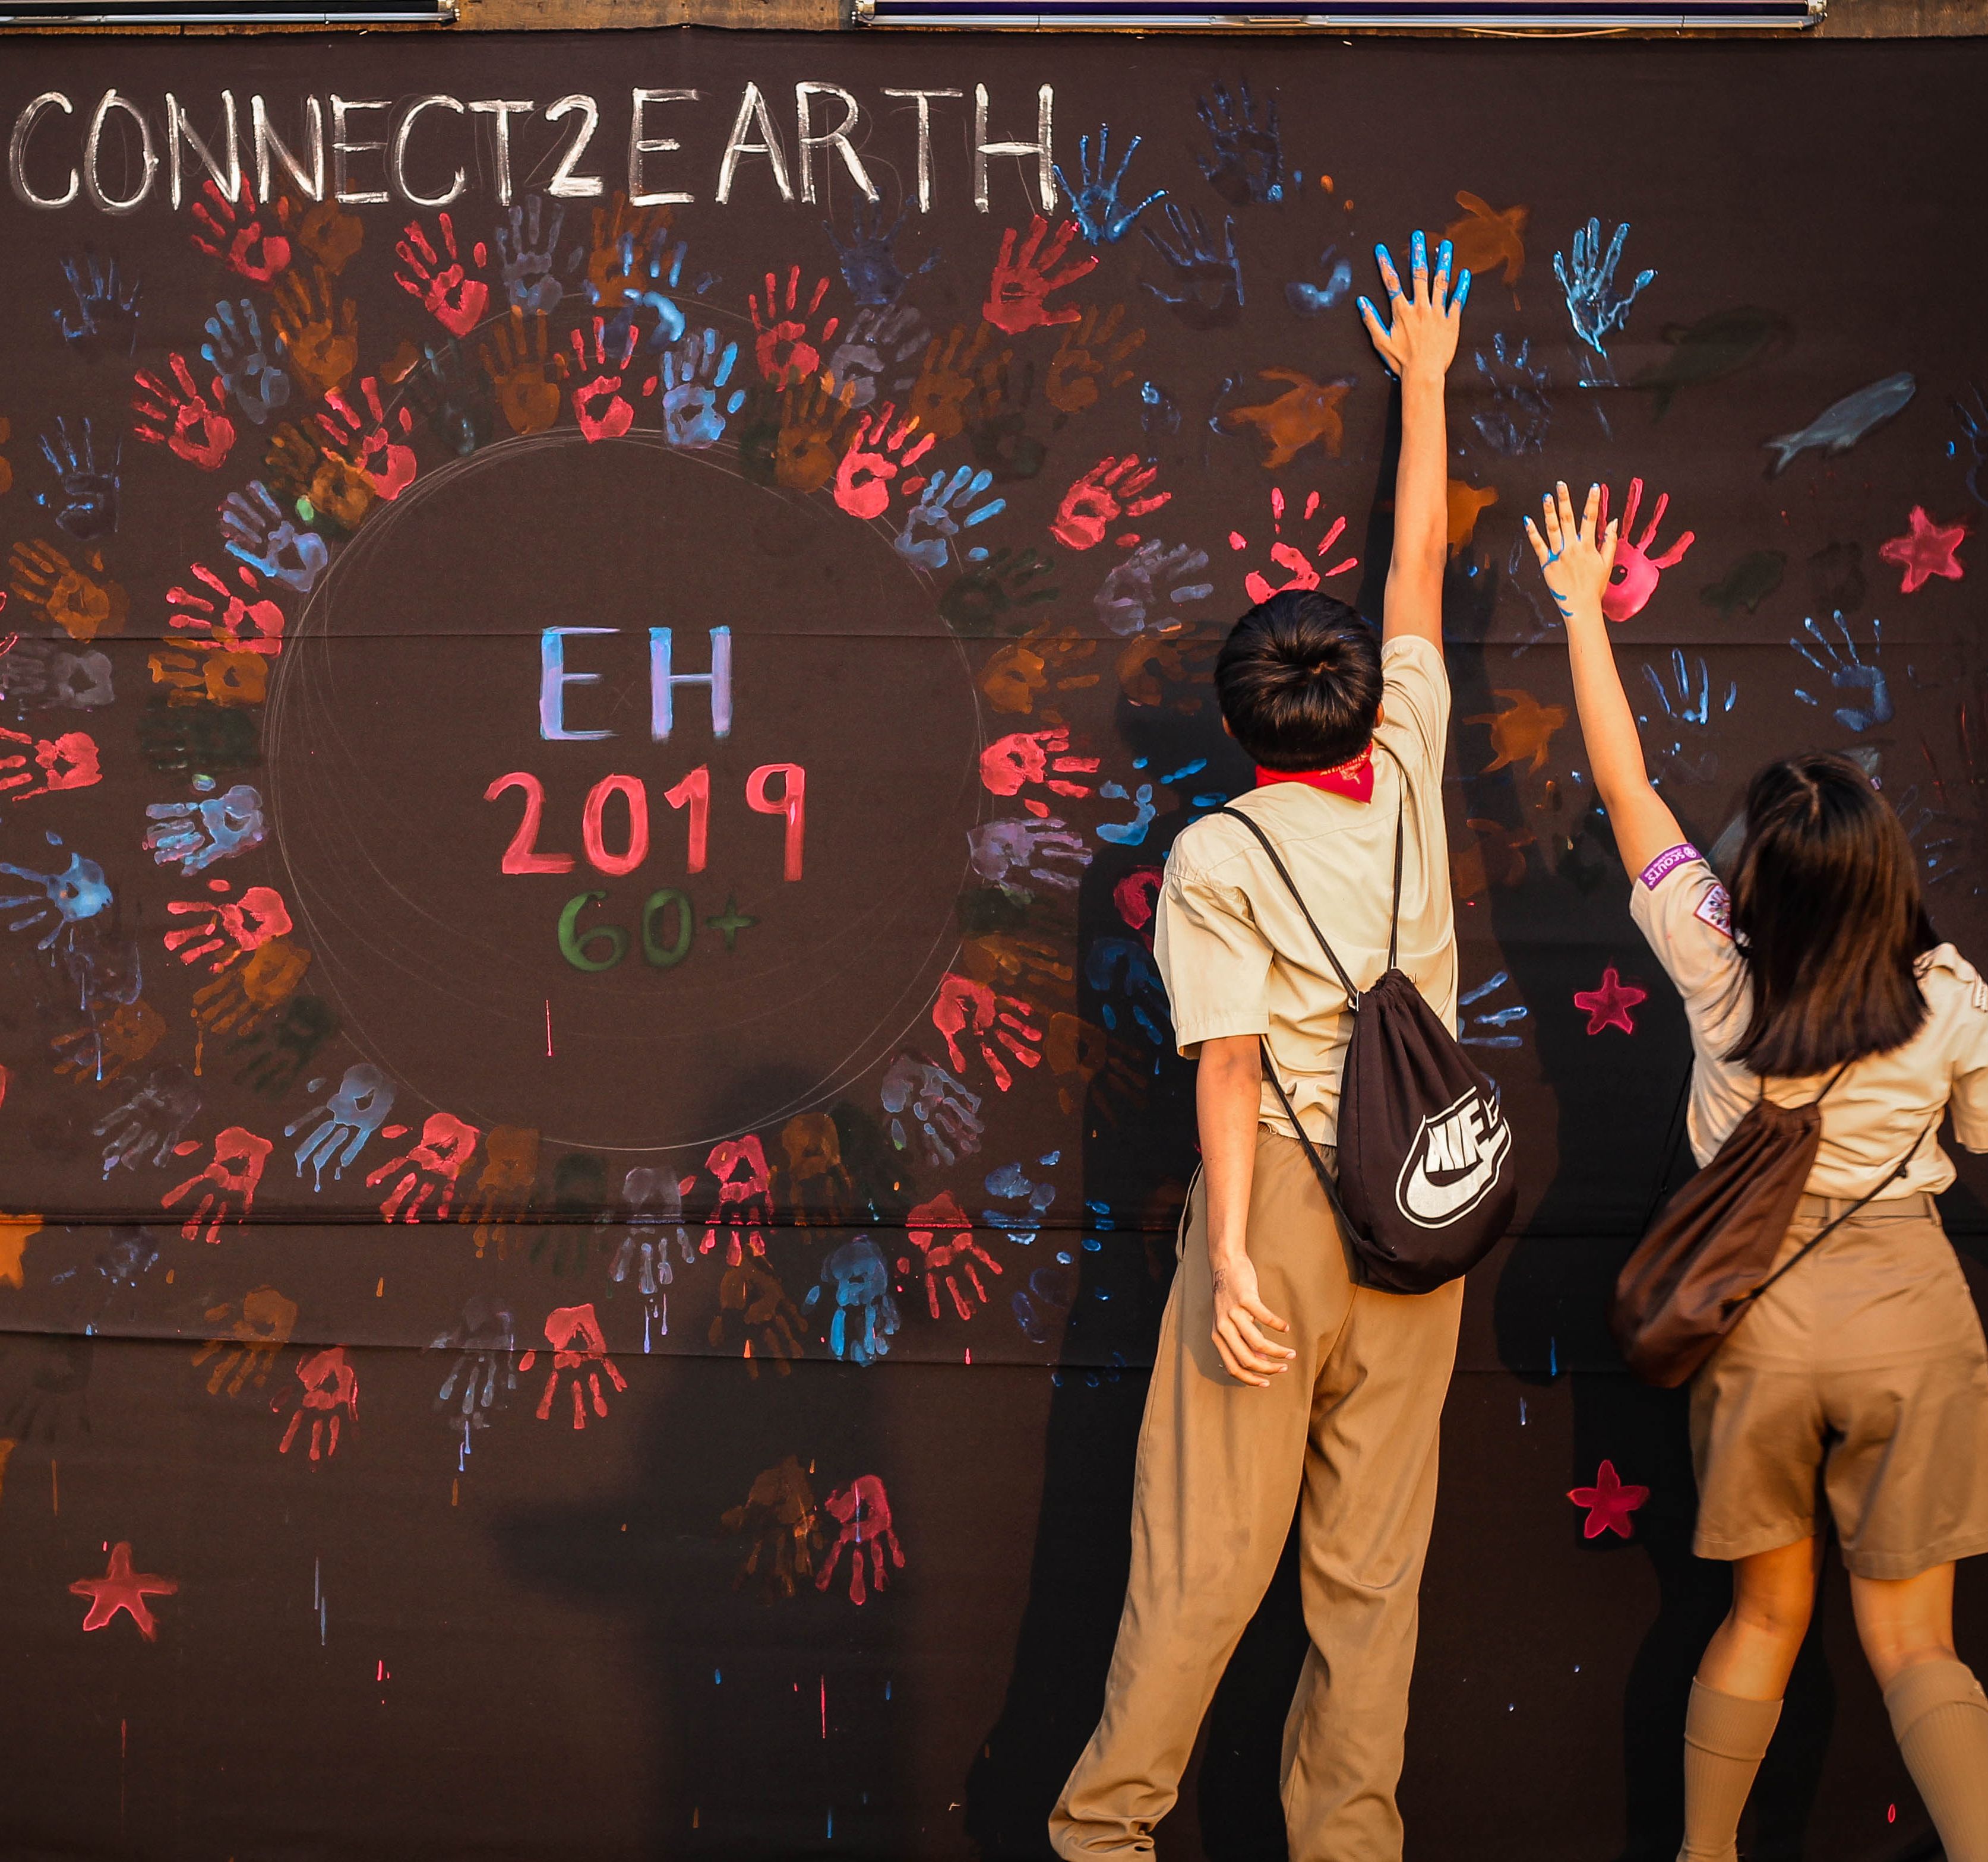 <h1>Earth Hour 2019 Main Event</h1>
<p>With the threats of plastic pollution and loss of nature plaguing the planet, thousands gathered at Circuit Event Grounds in Makati to participate in the World Wide Fund for Nature (WWF) Philippines’ Earth Hour switch-off event.</p>
<p style="text-align: right;"><a href="https://support.wwf.org.ph/what-we-do/climate/earth-hour/main-switch-off-event-2019/">Read More &gt;</a></p>